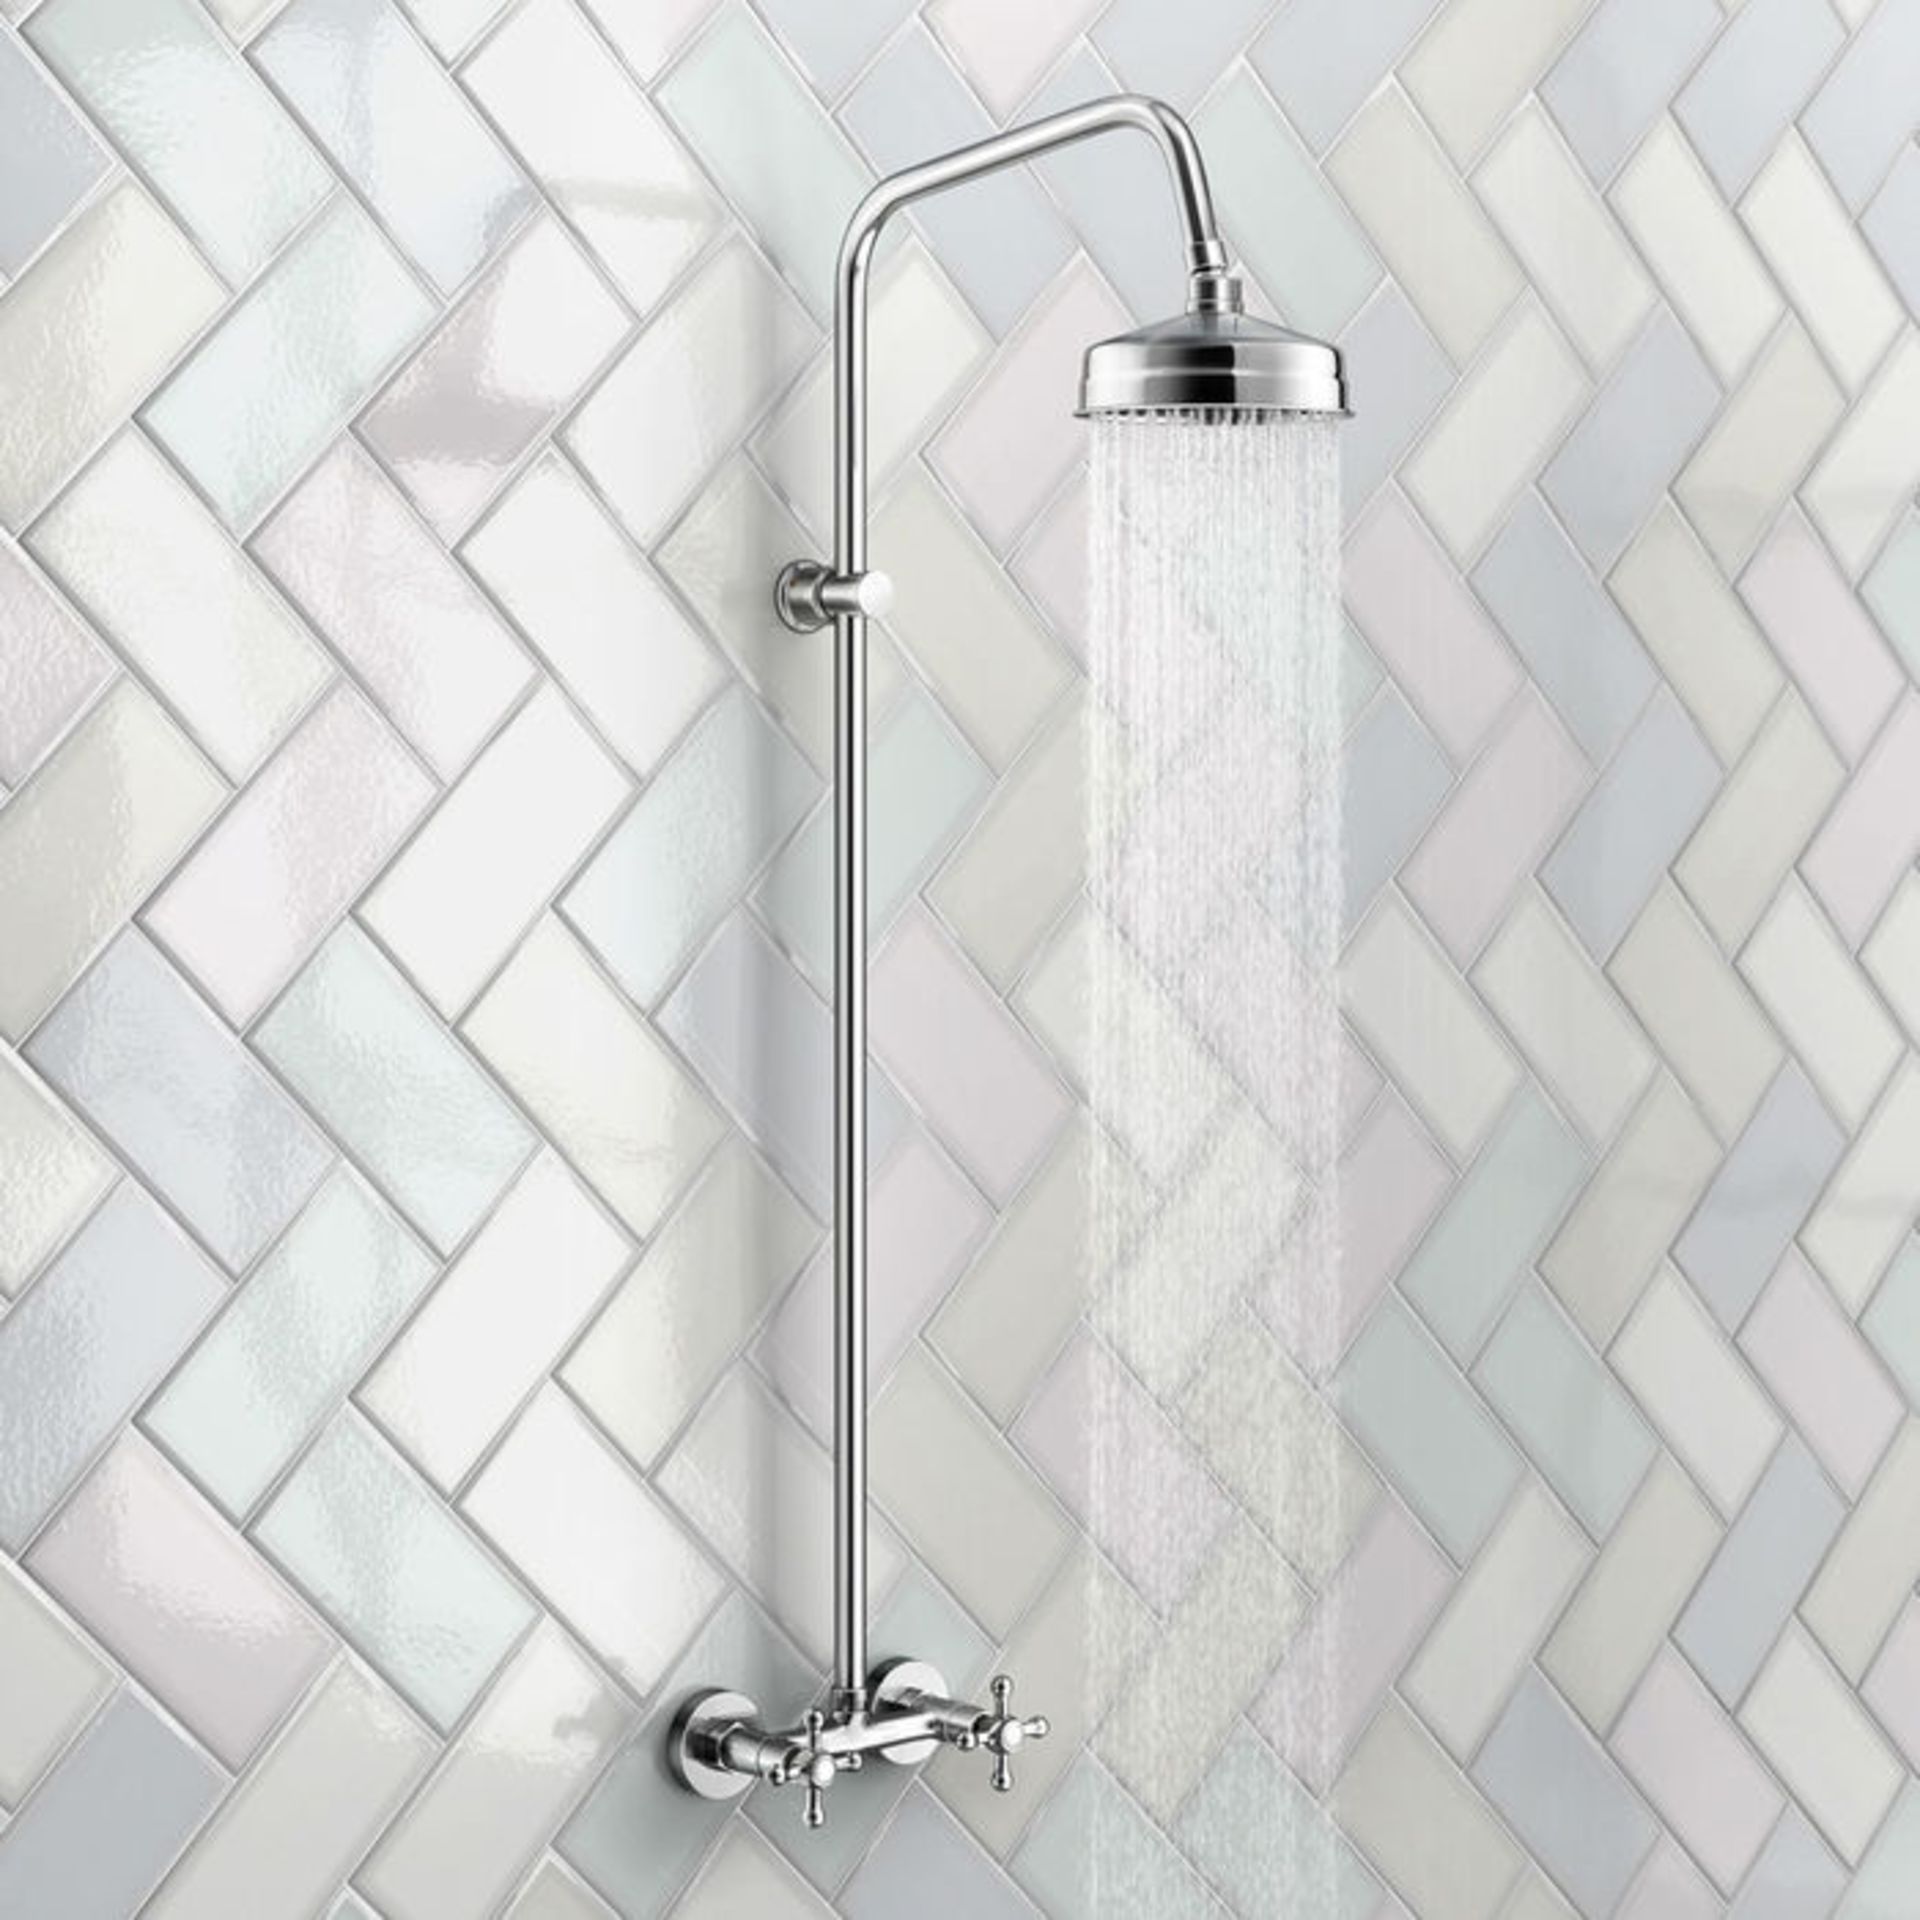 (Q68) Traditional Exposed Shower Medium Head. Exposed design makes for a statement piece. Stunning